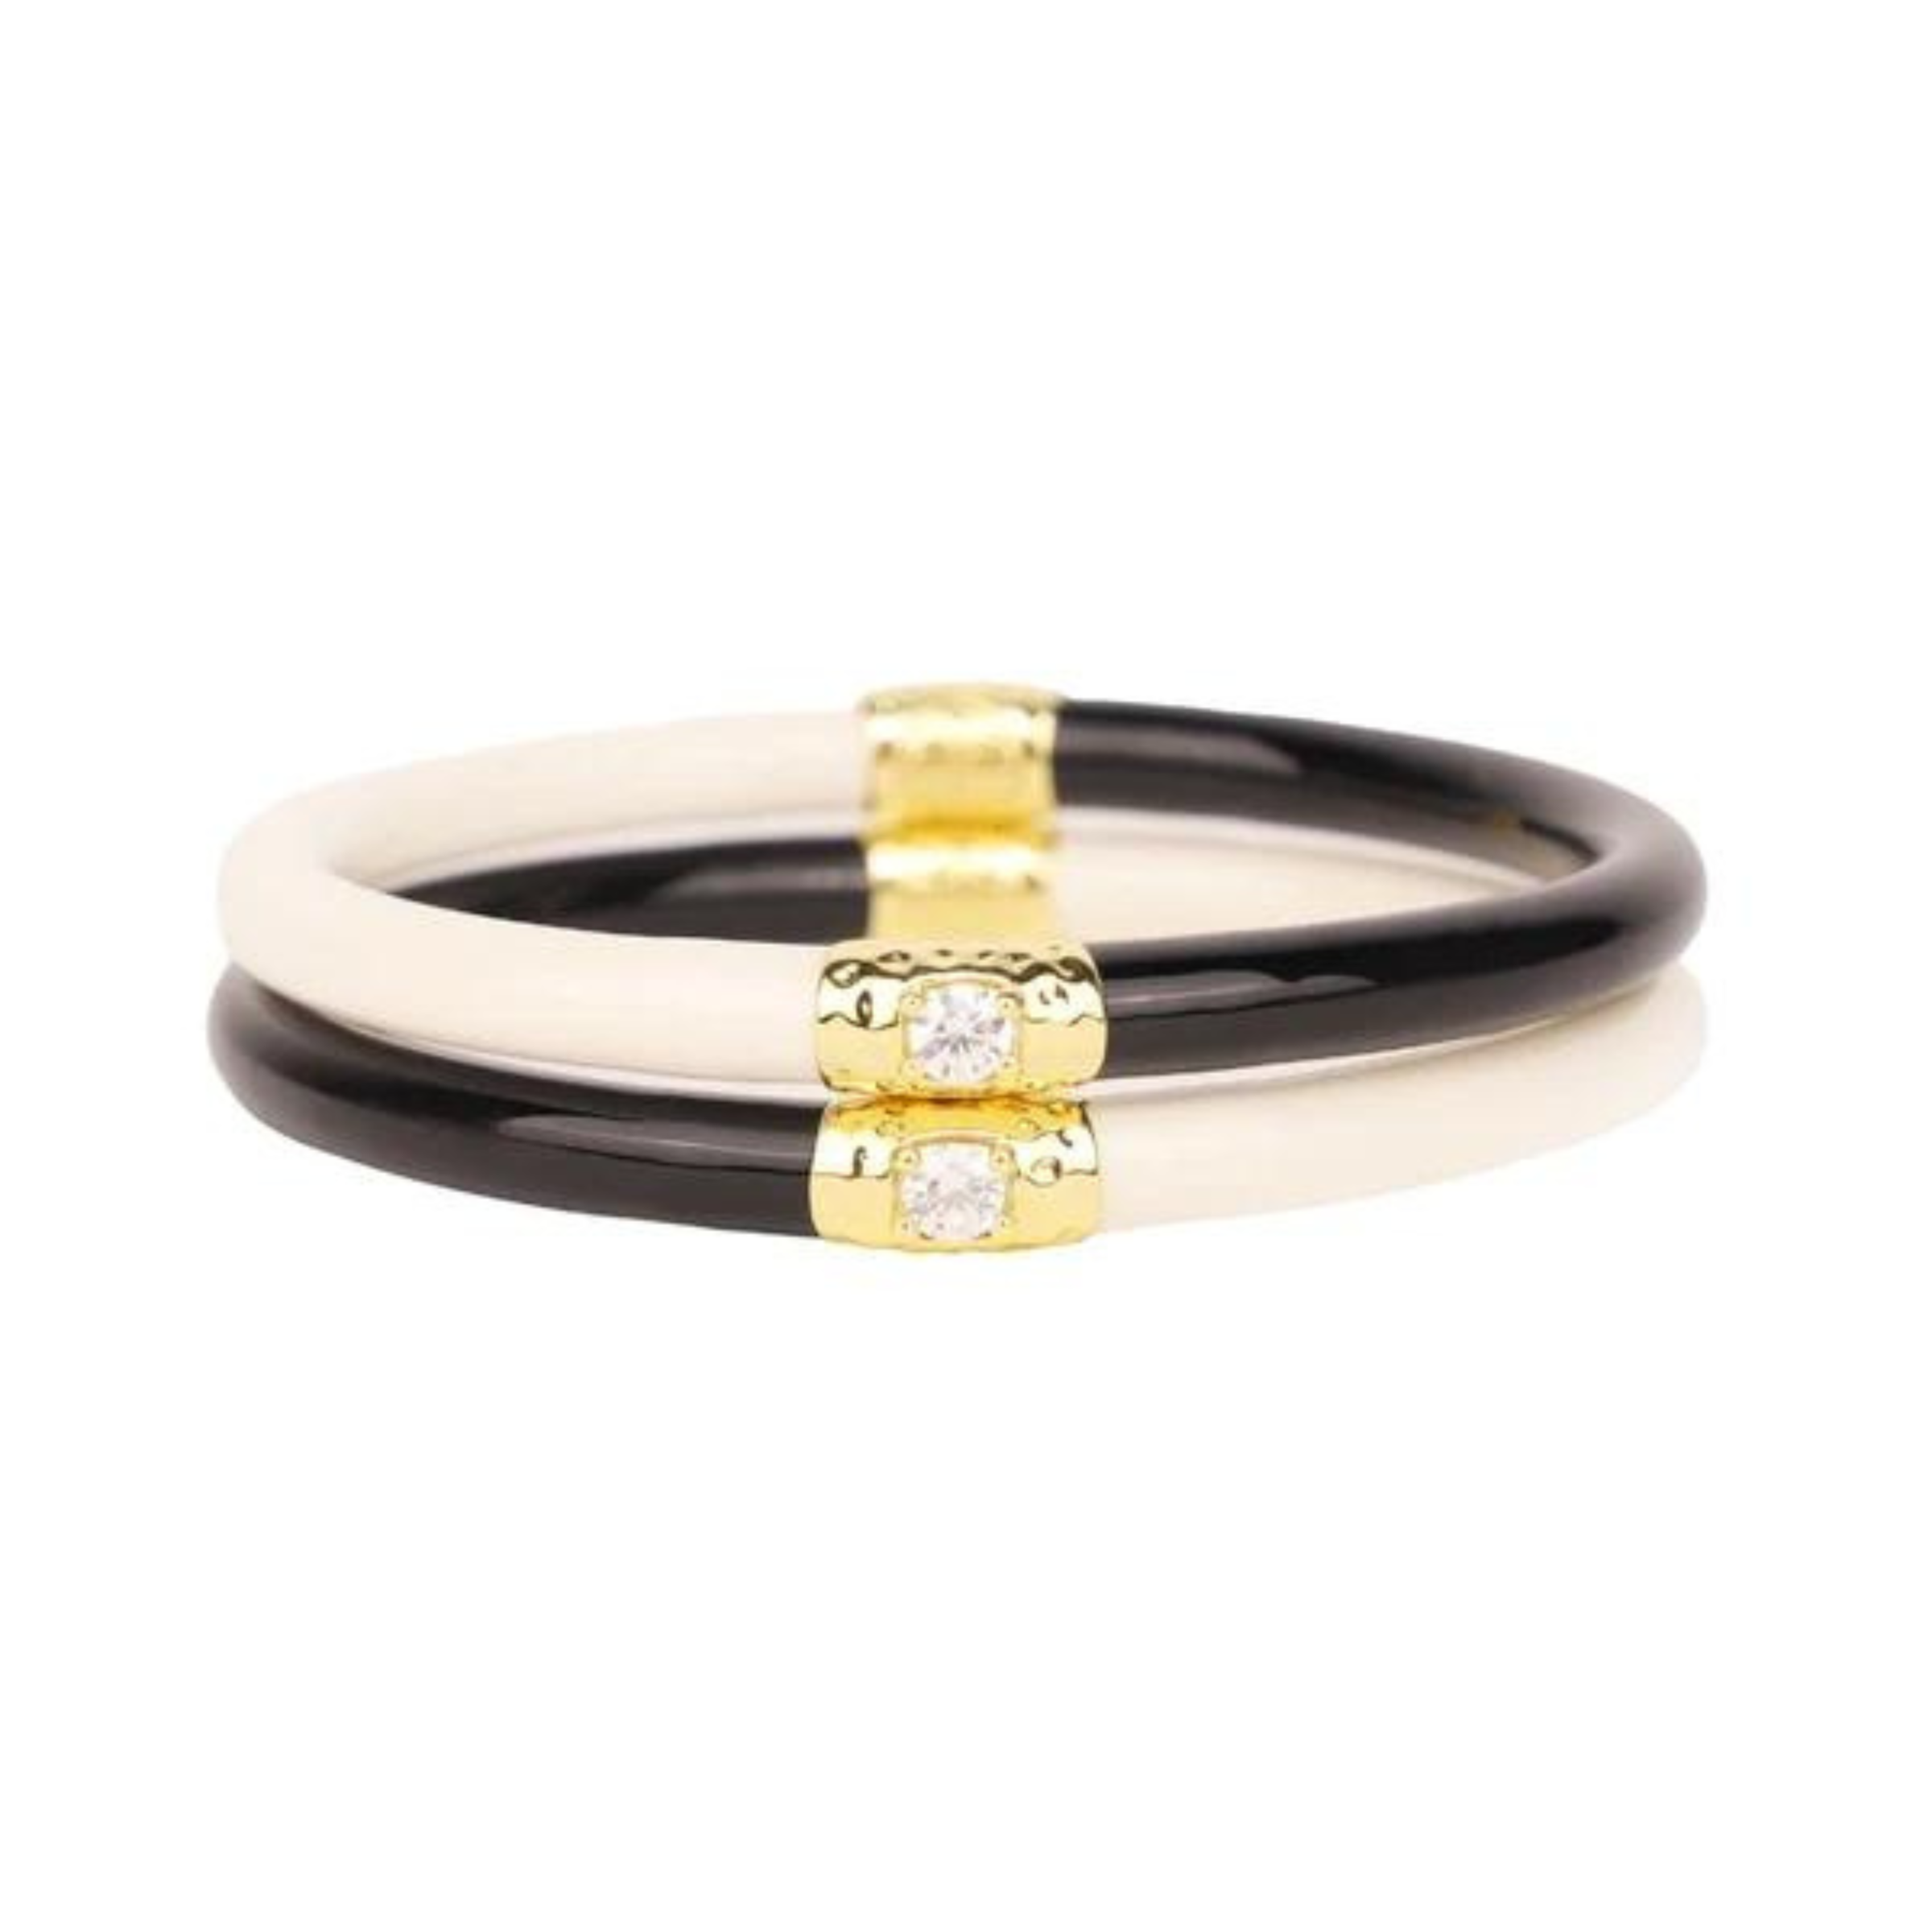 Two half white and haf black plastic, tube bracelet with two gold segments on the bracelet. These bracelets are pictured on top of each other on a white background. 